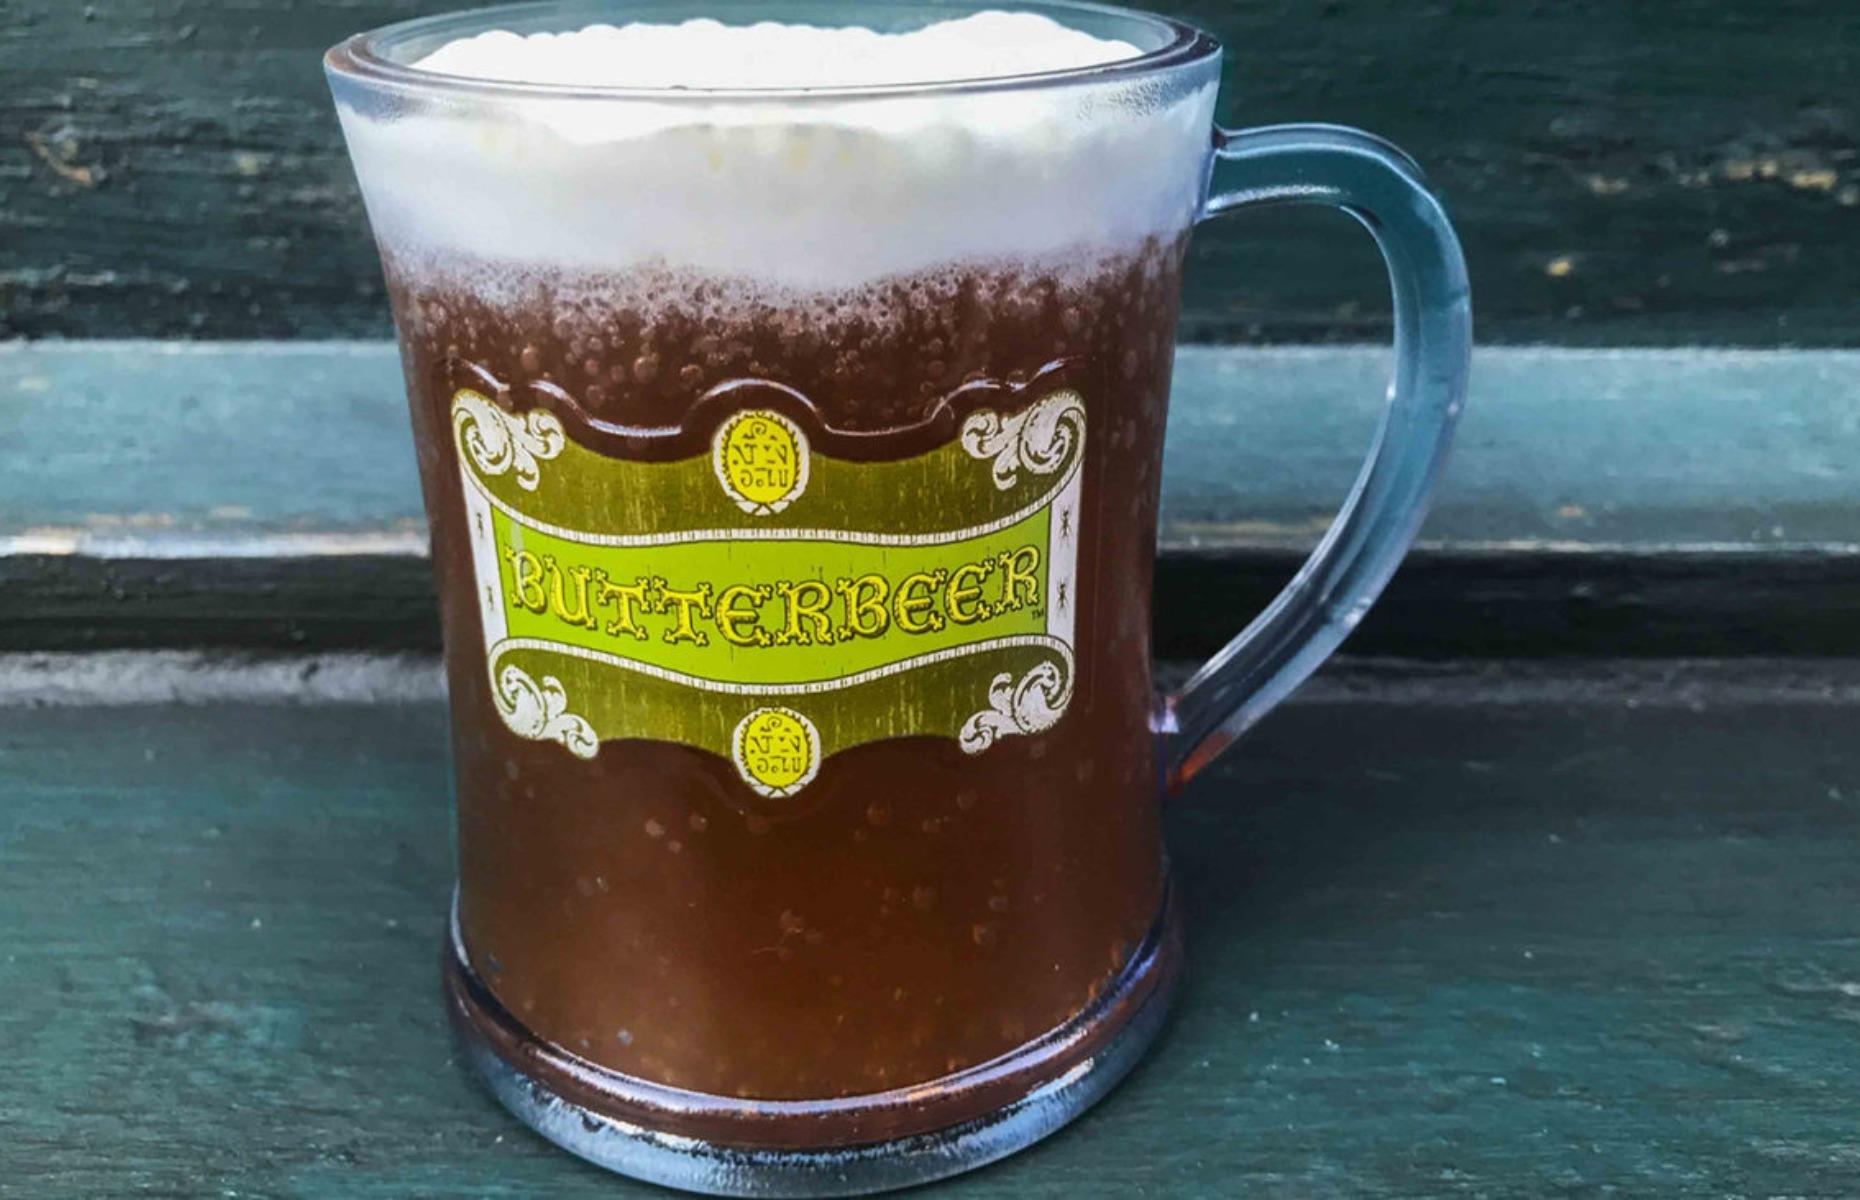 <p>There’s no beverage more iconic in the Potterverse than Butterbeer. Available at Universal Studio's The Fountain of Fair Fortune, you can choose between boozy and non-alcoholic varieties. A fan-favorite, this smooth beverage is the perfect blend of shortbread and butterscotch flavors. If you've got a sweet tooth, you'll enjoy every sip.</p>